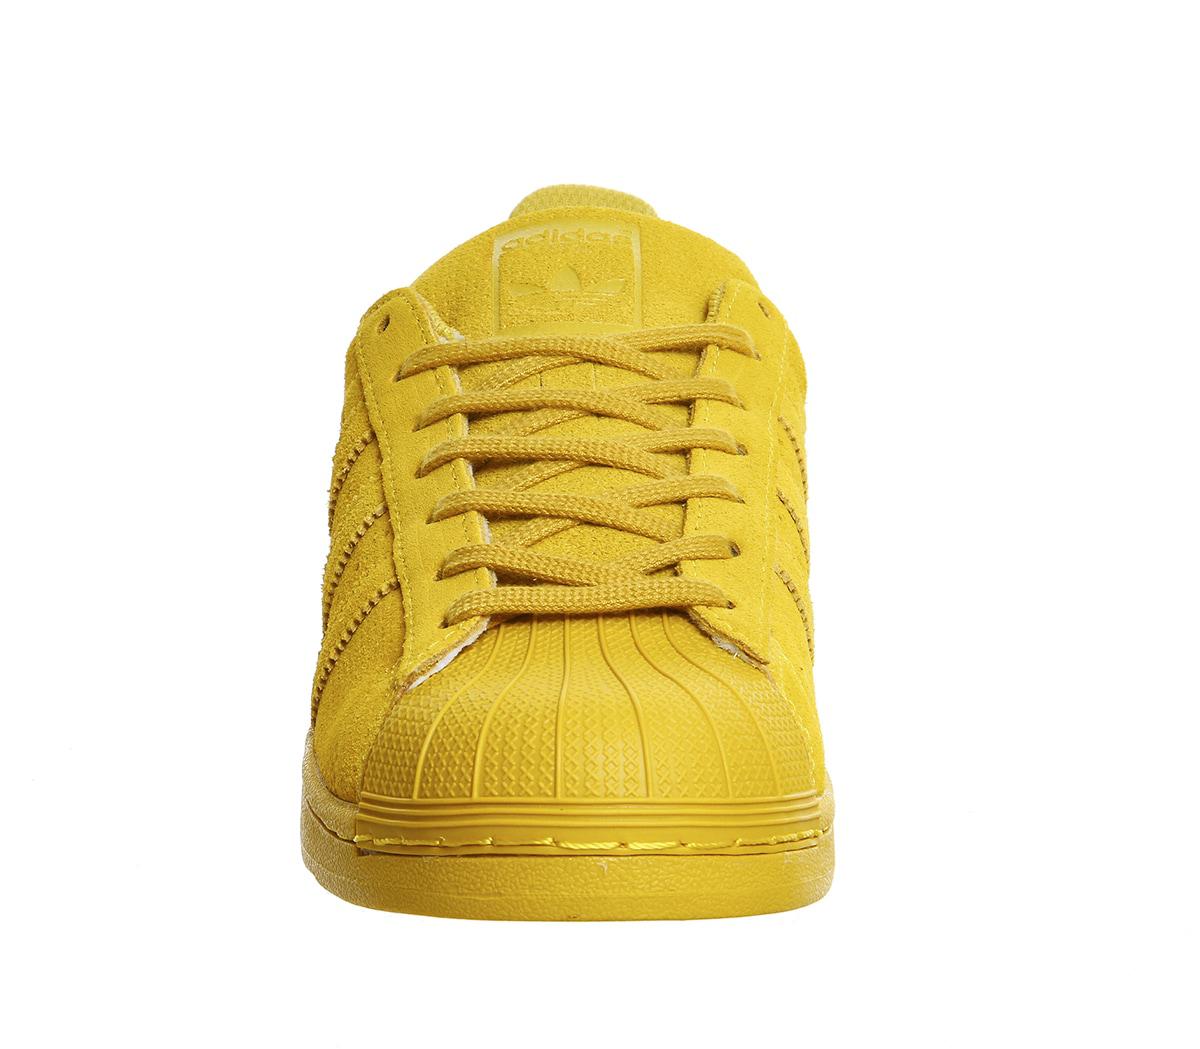 adidas Superstar 1 Suede Low-Top Sneakers in Yellow | Lyst ألعاب نينتندو سويتش